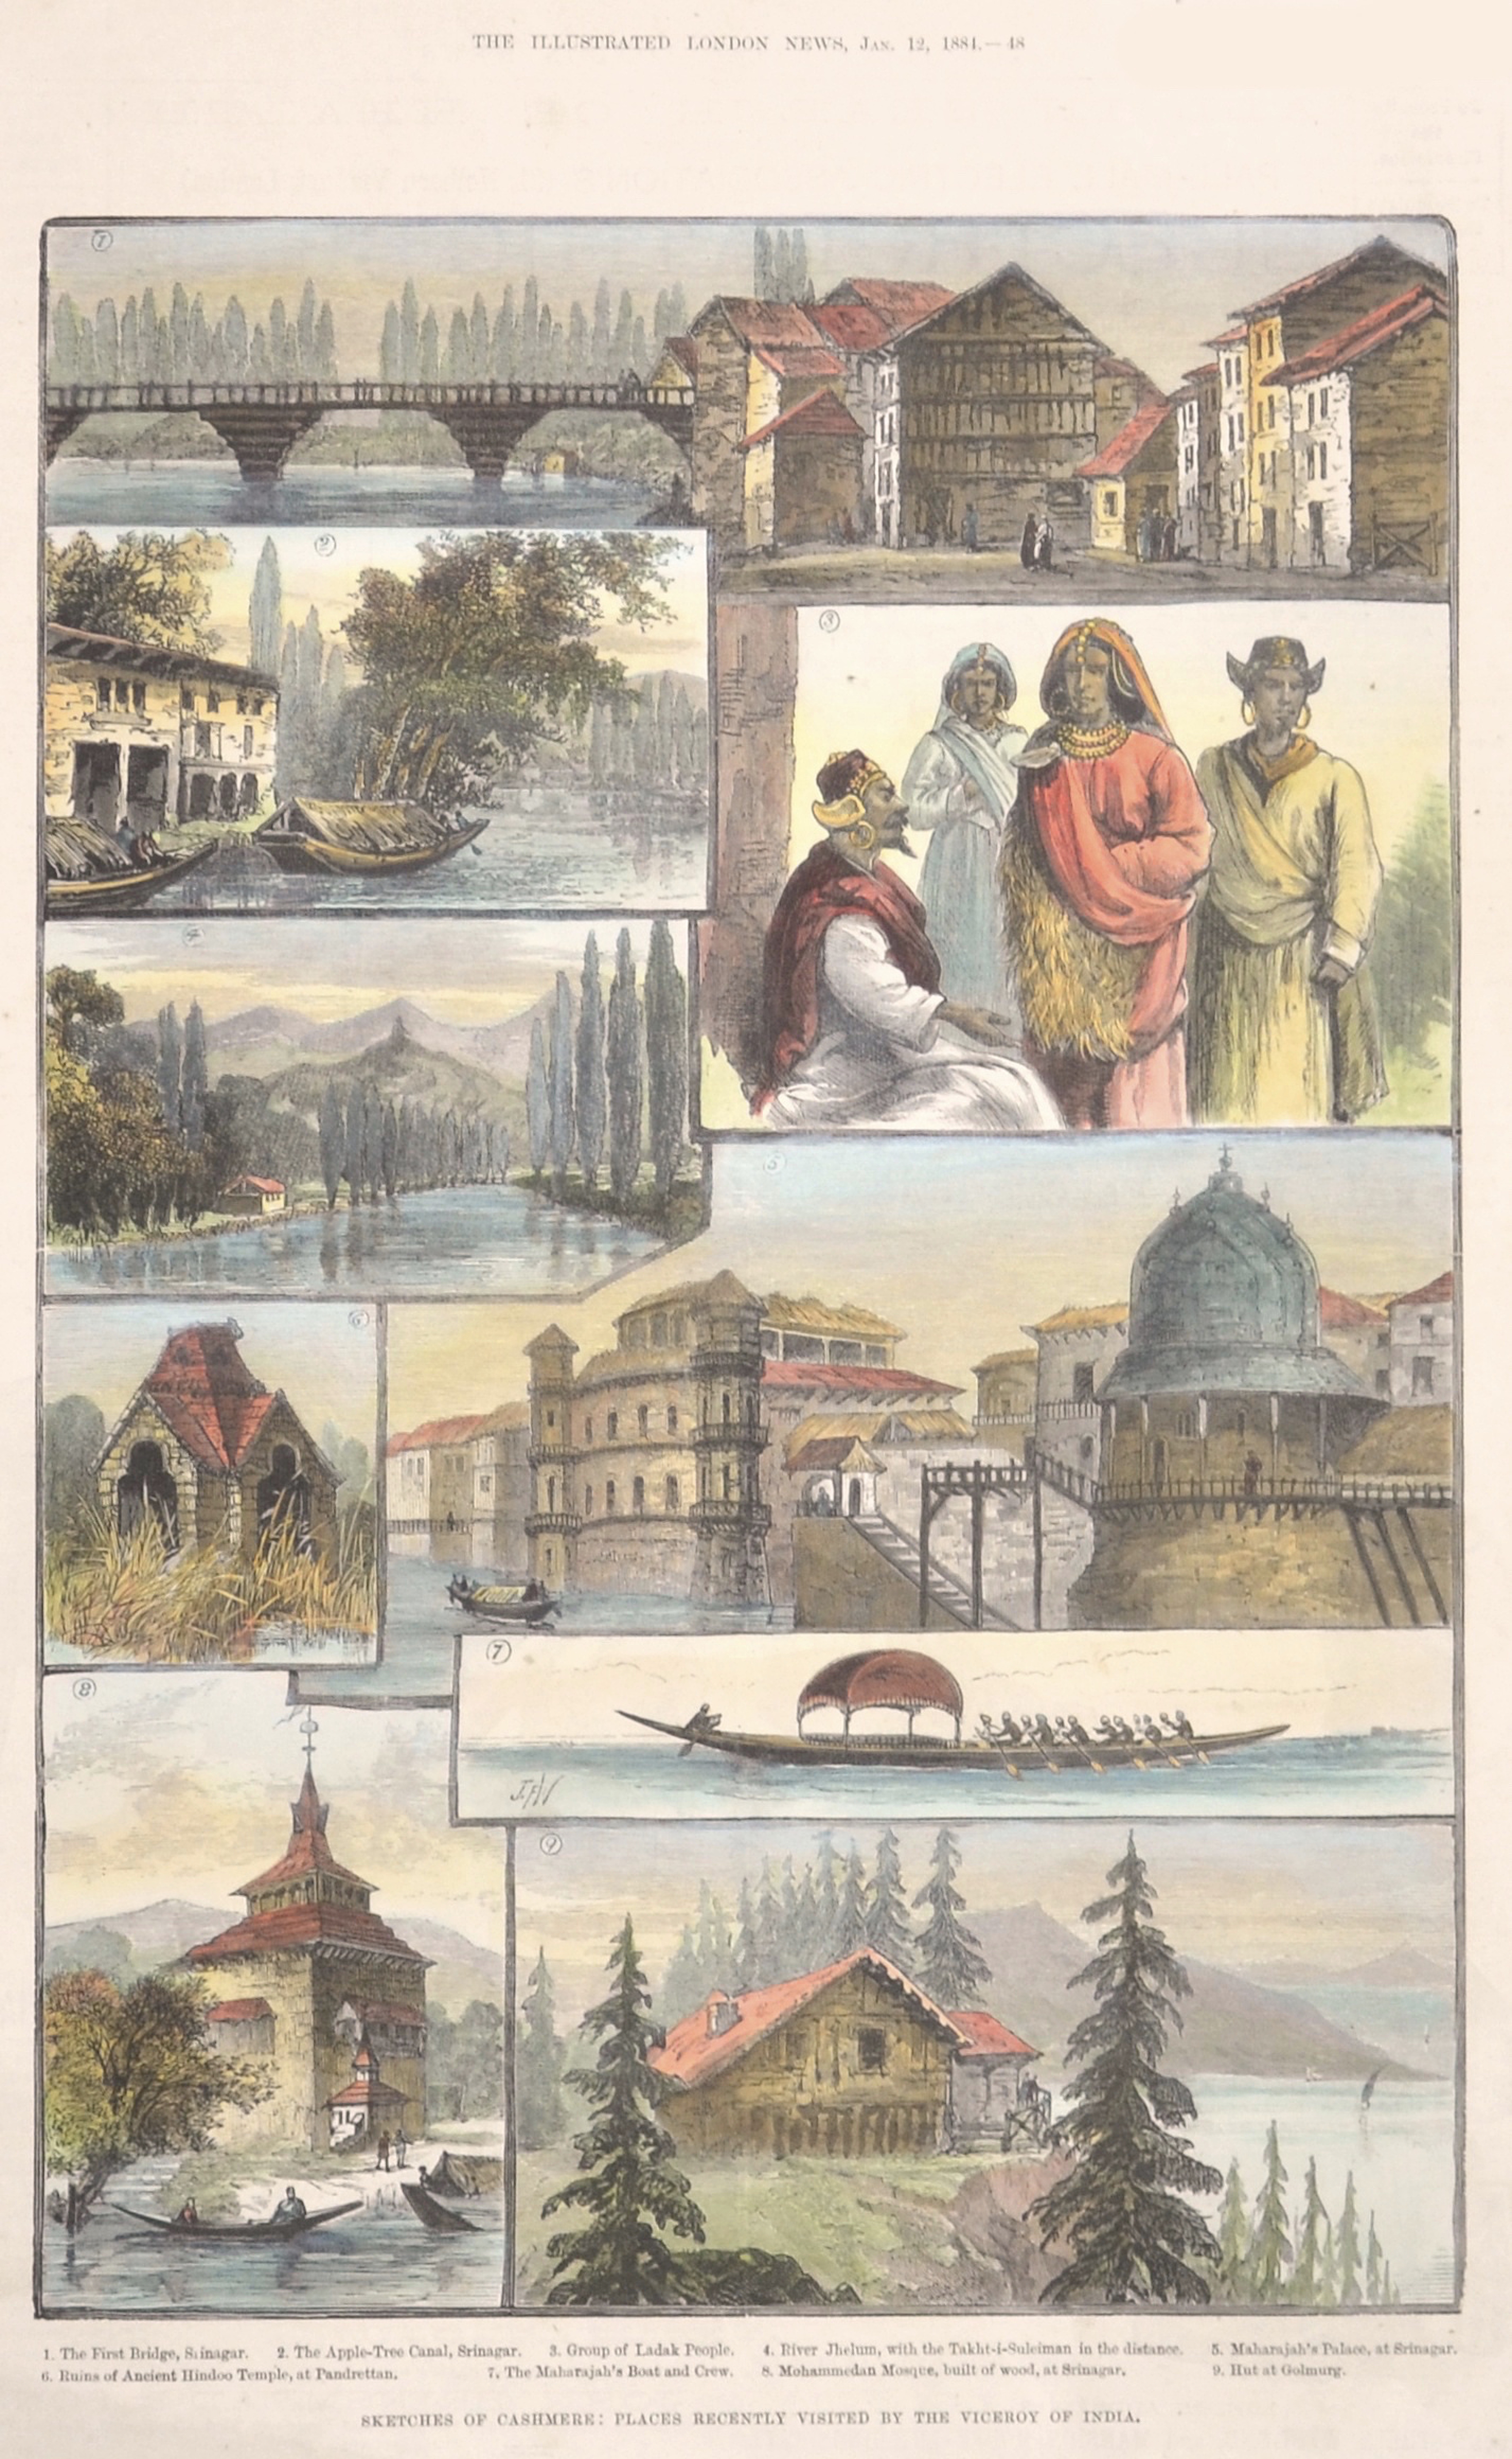 Anonymus  Sketches of Cashmere: Places recently visited by the viceroy of india